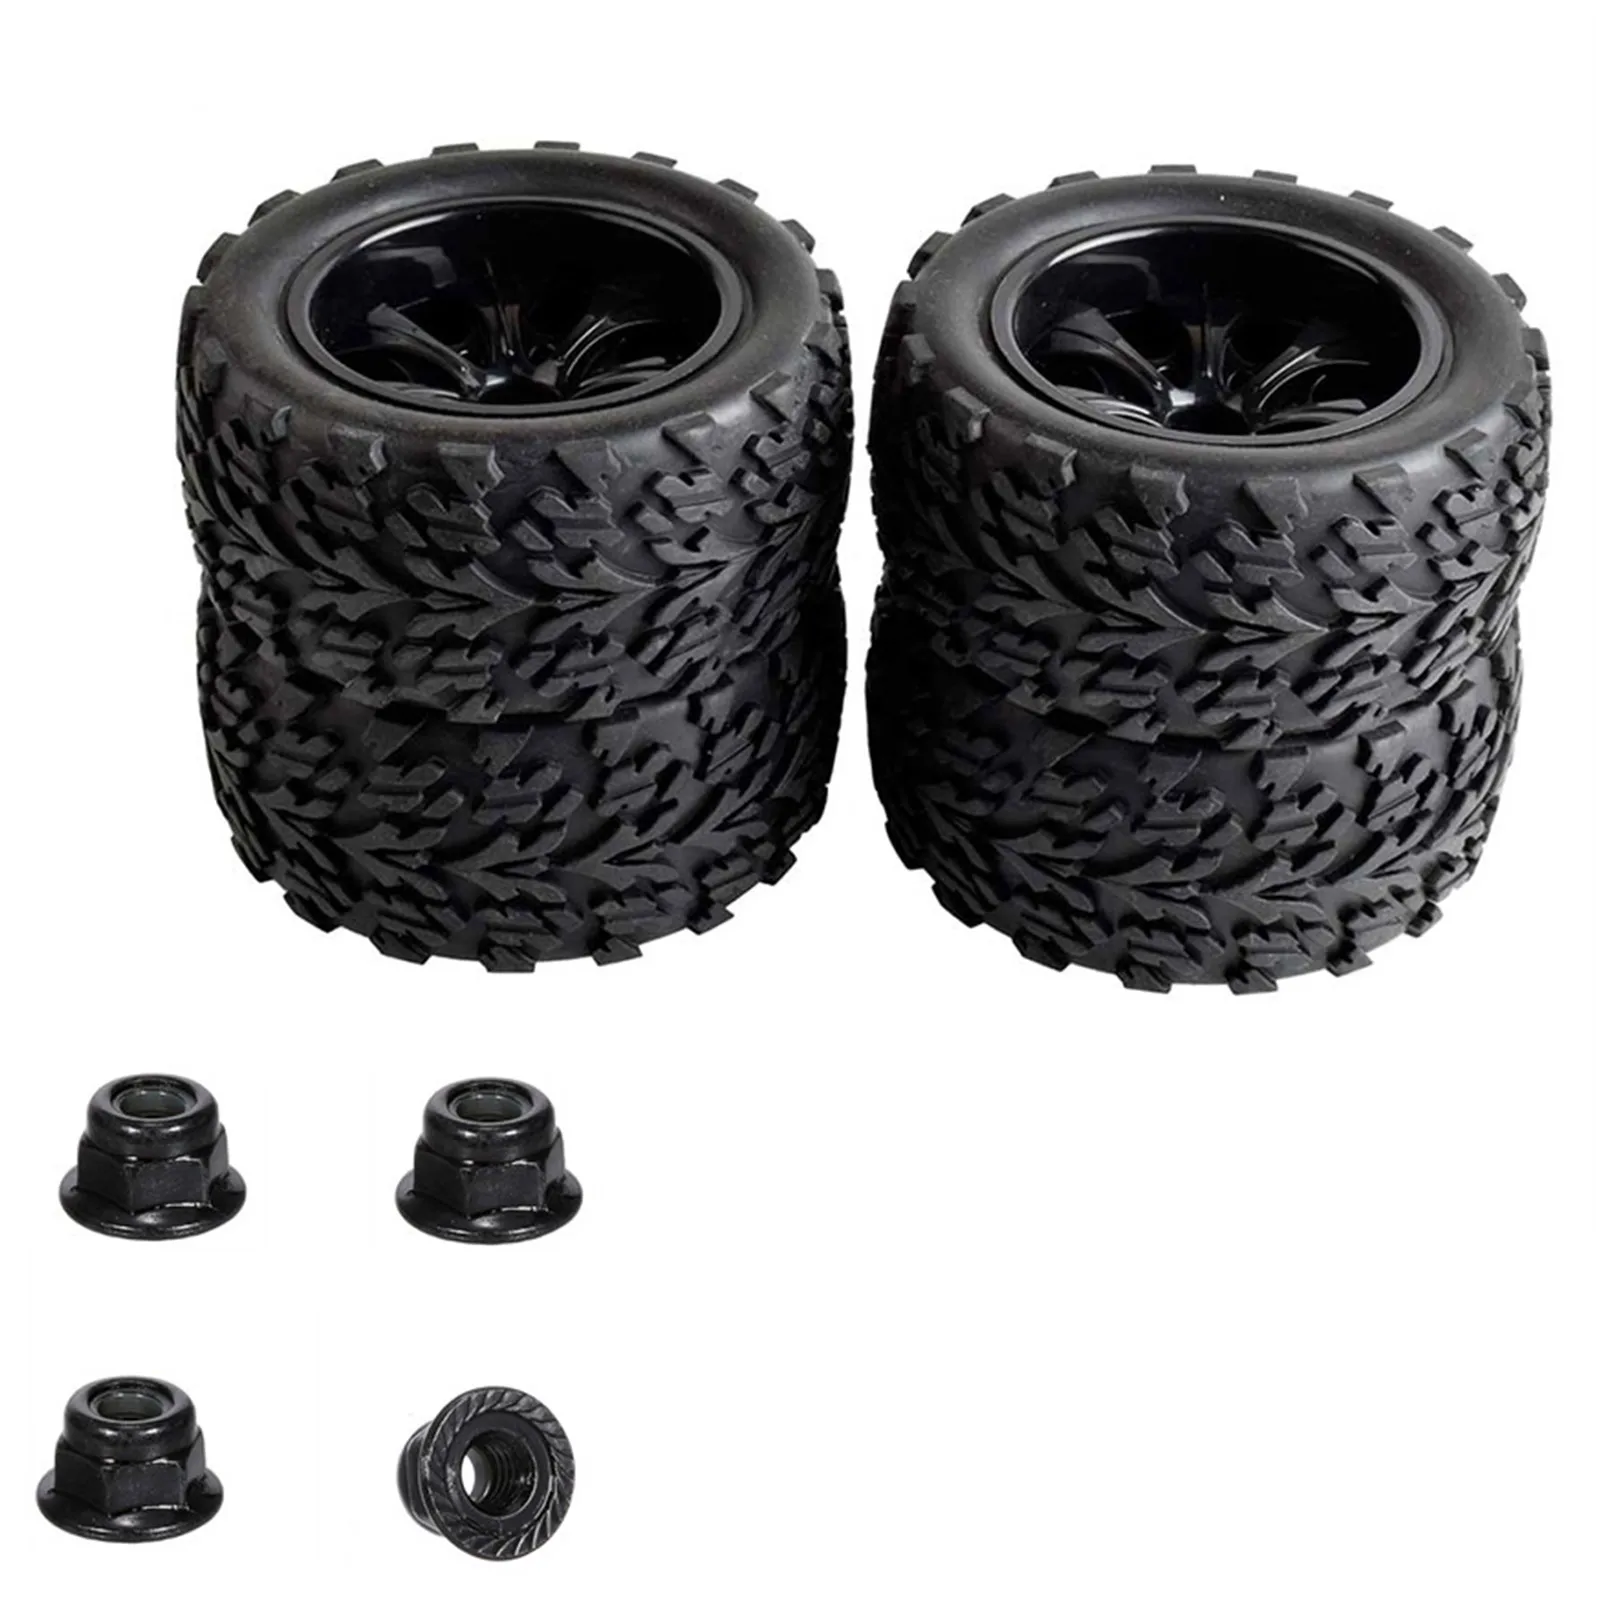 

4Pcs RC Off-Road Tires 1/10 RC Tires and Wheels Black Rubber Tyres for 1:10 Scale Off-Road Vehicles Foam Inserts Wear-Resistant